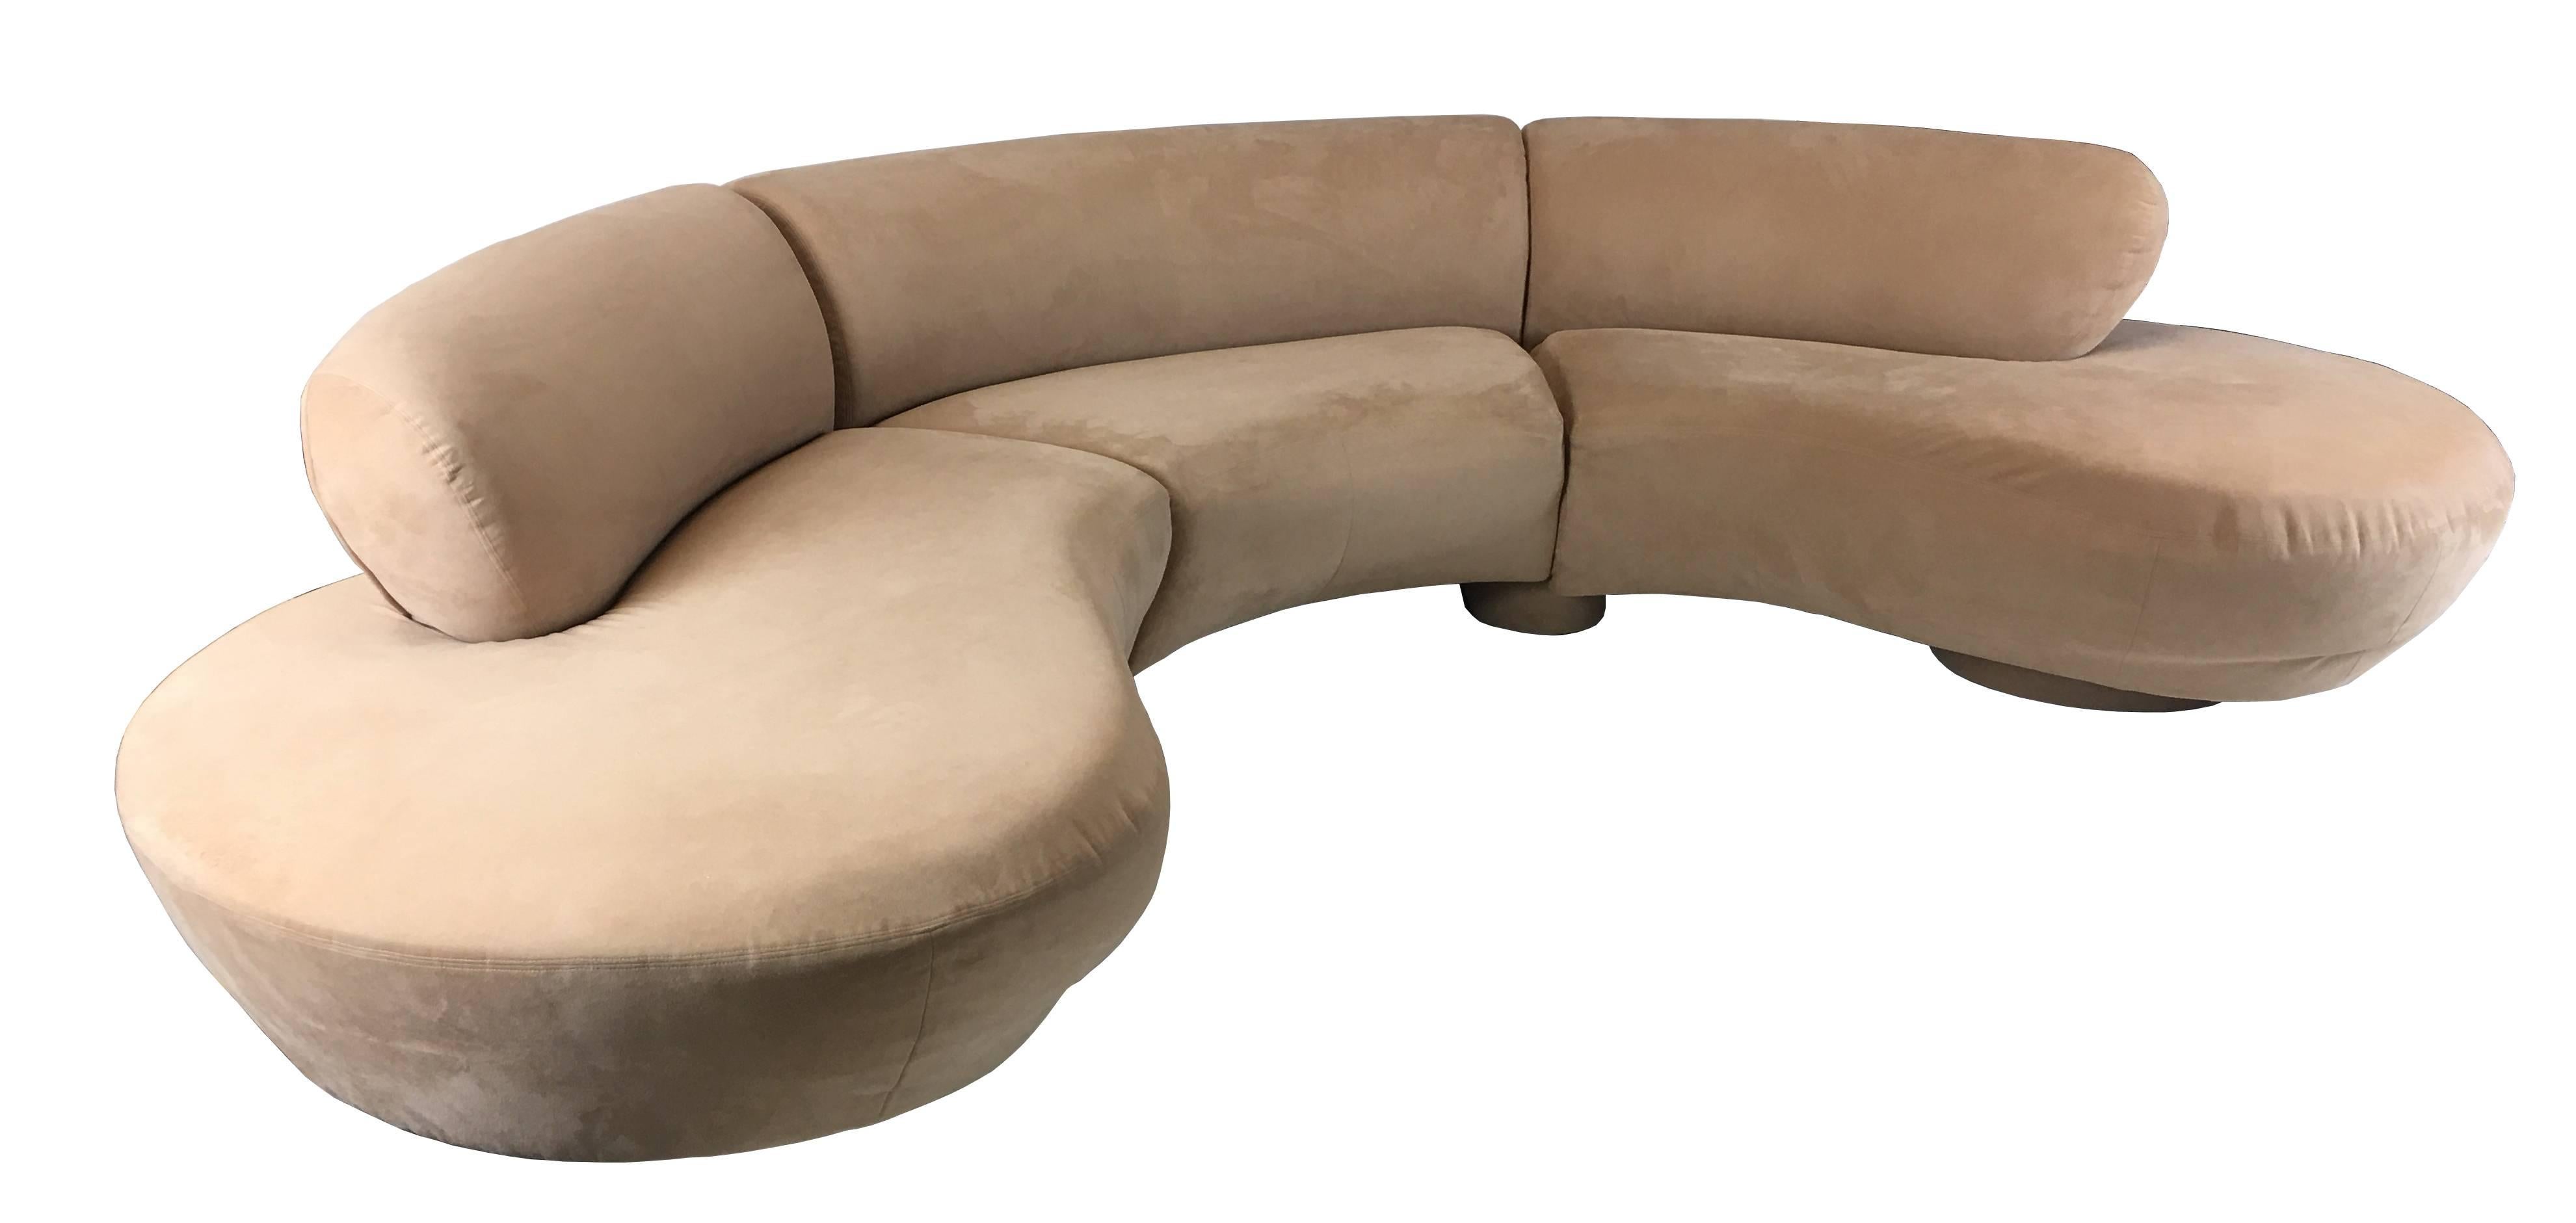 Sculptural three-piece free-form Cloud sofa by Vladimir Kagan for Directional. The three sections are connected by oval plinth style bases and the two ends are raised on round plinth bases upholstered in the same fabric. The sofa is upholstered in